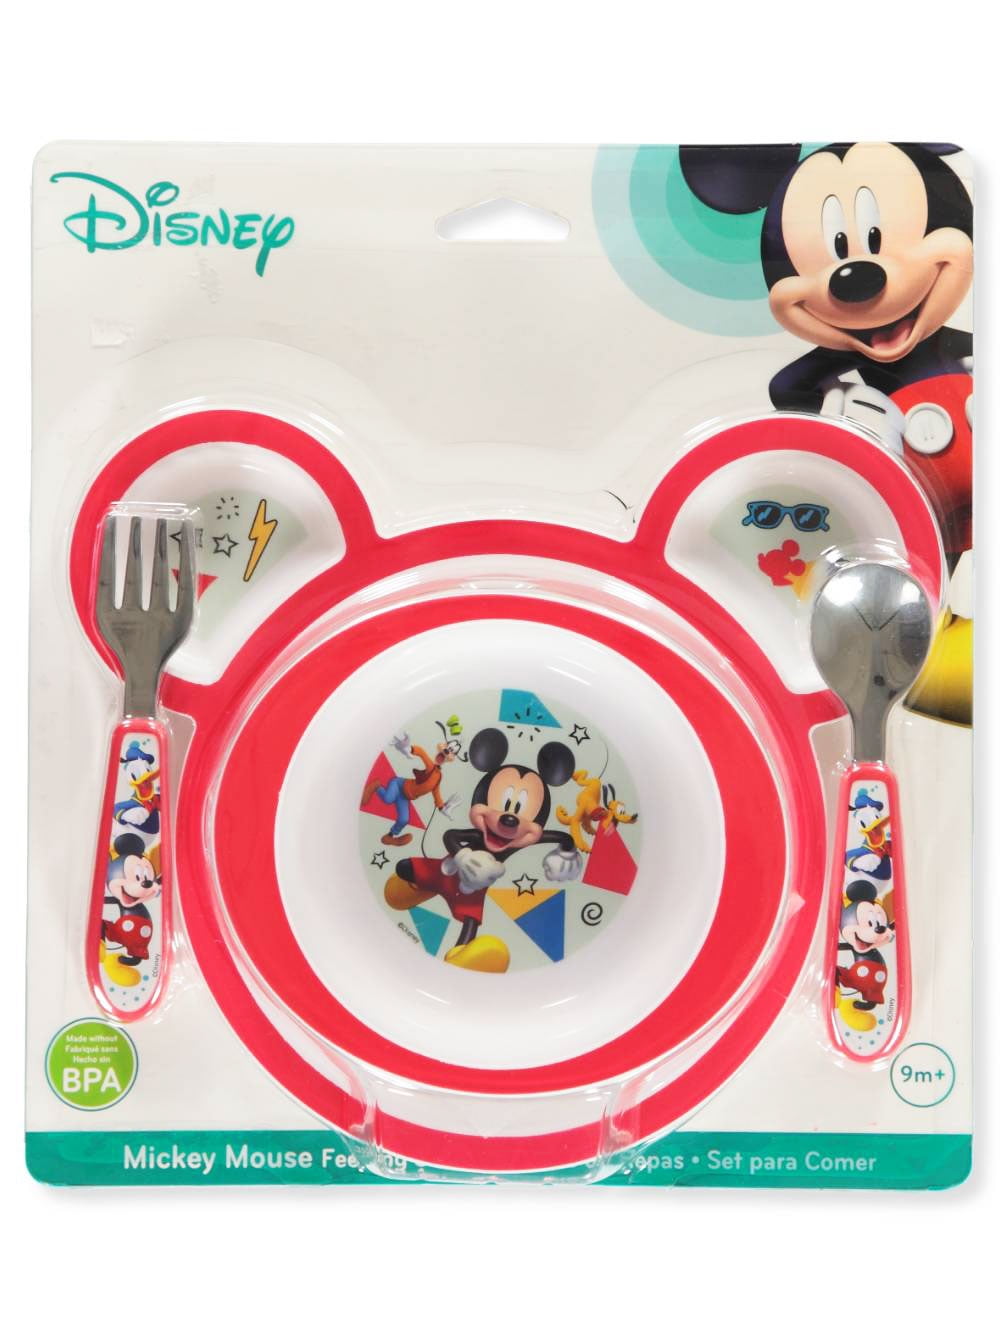 Mickey Mouse Baby Feeding Gift Set Plate Bowl Spoon Fork Age 12 Months Children 